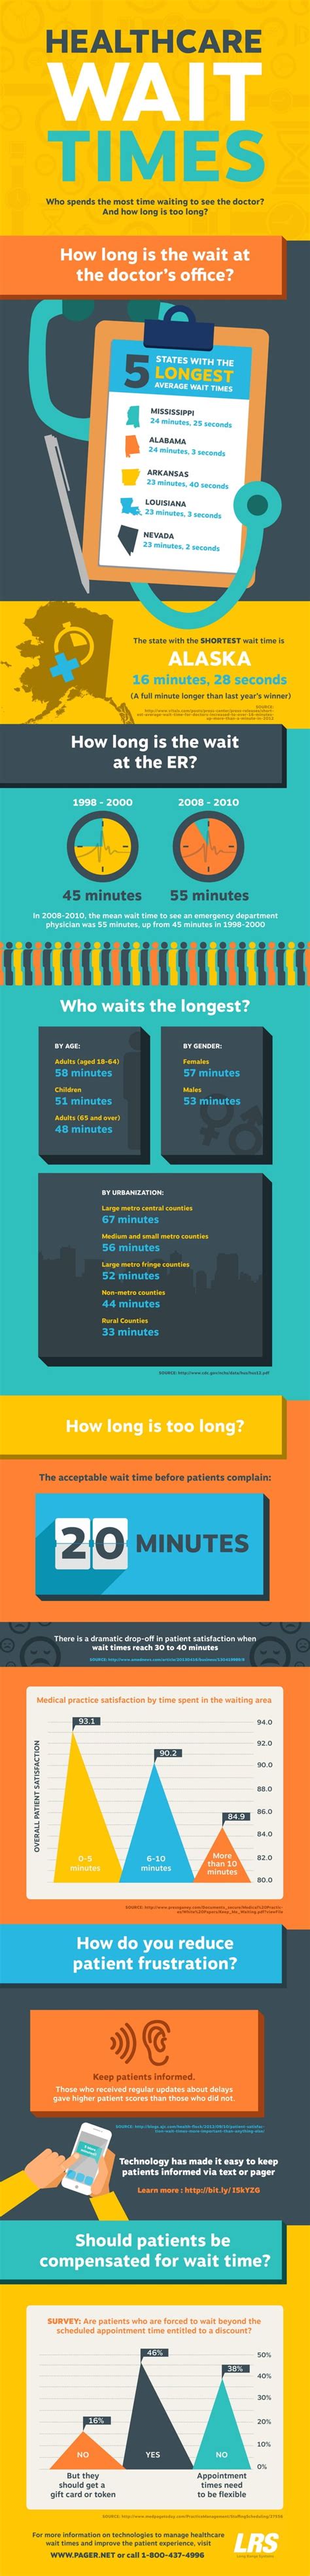 Healthcare Wait Times Infographic